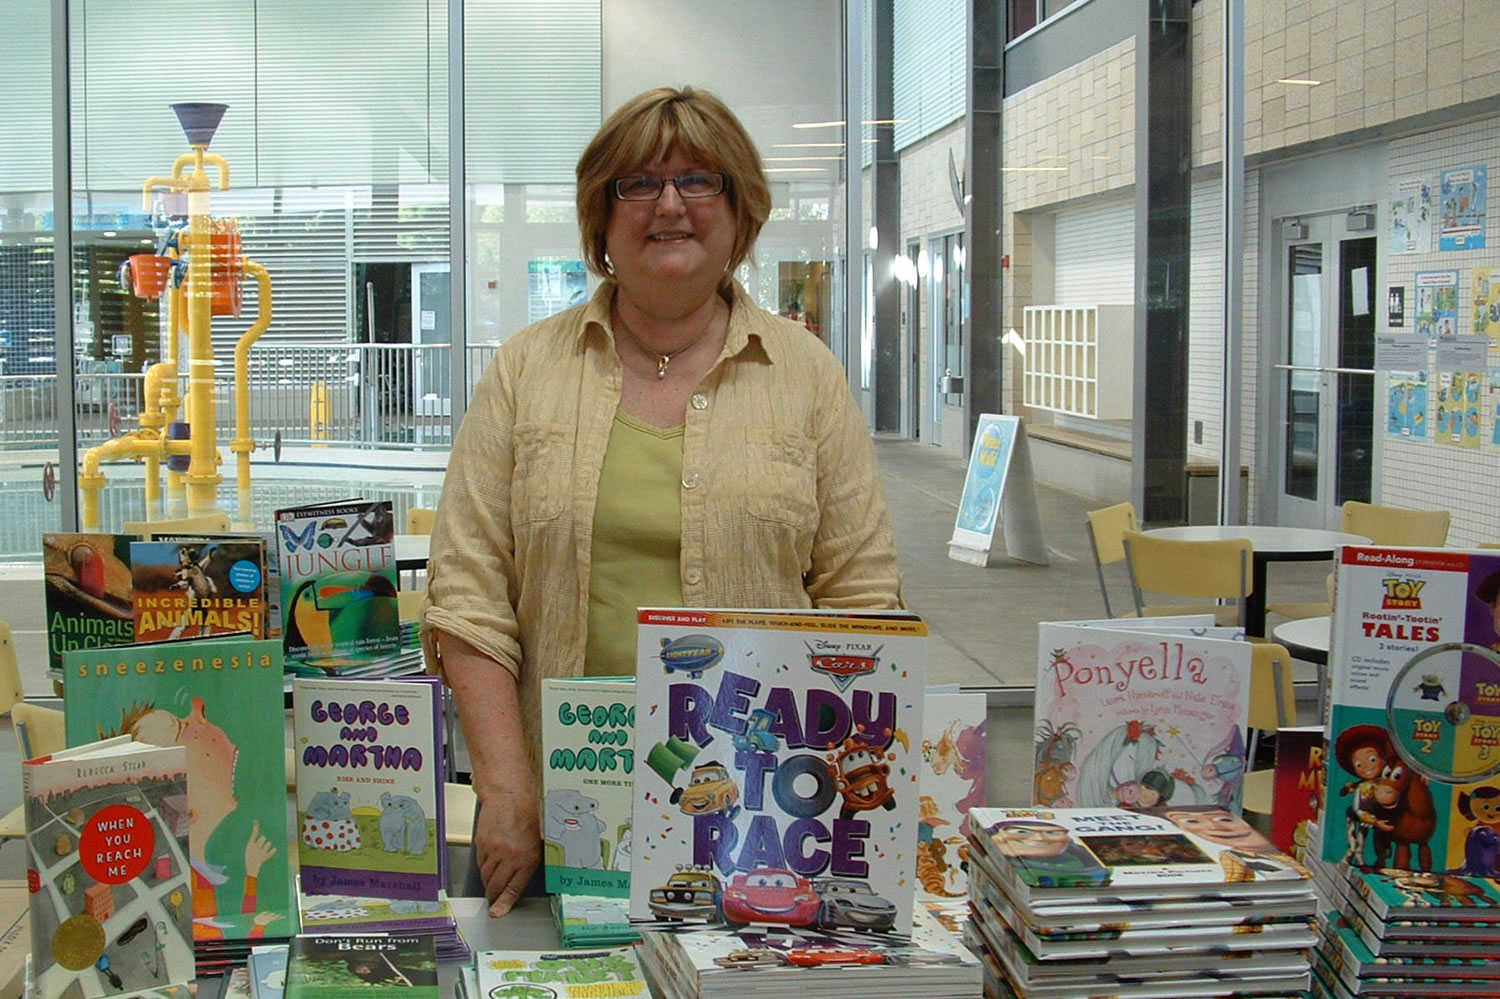 Fircrest: Altrusa International of Clark County President Tina Smith stands by more than 100 books that were given to local children Sept.